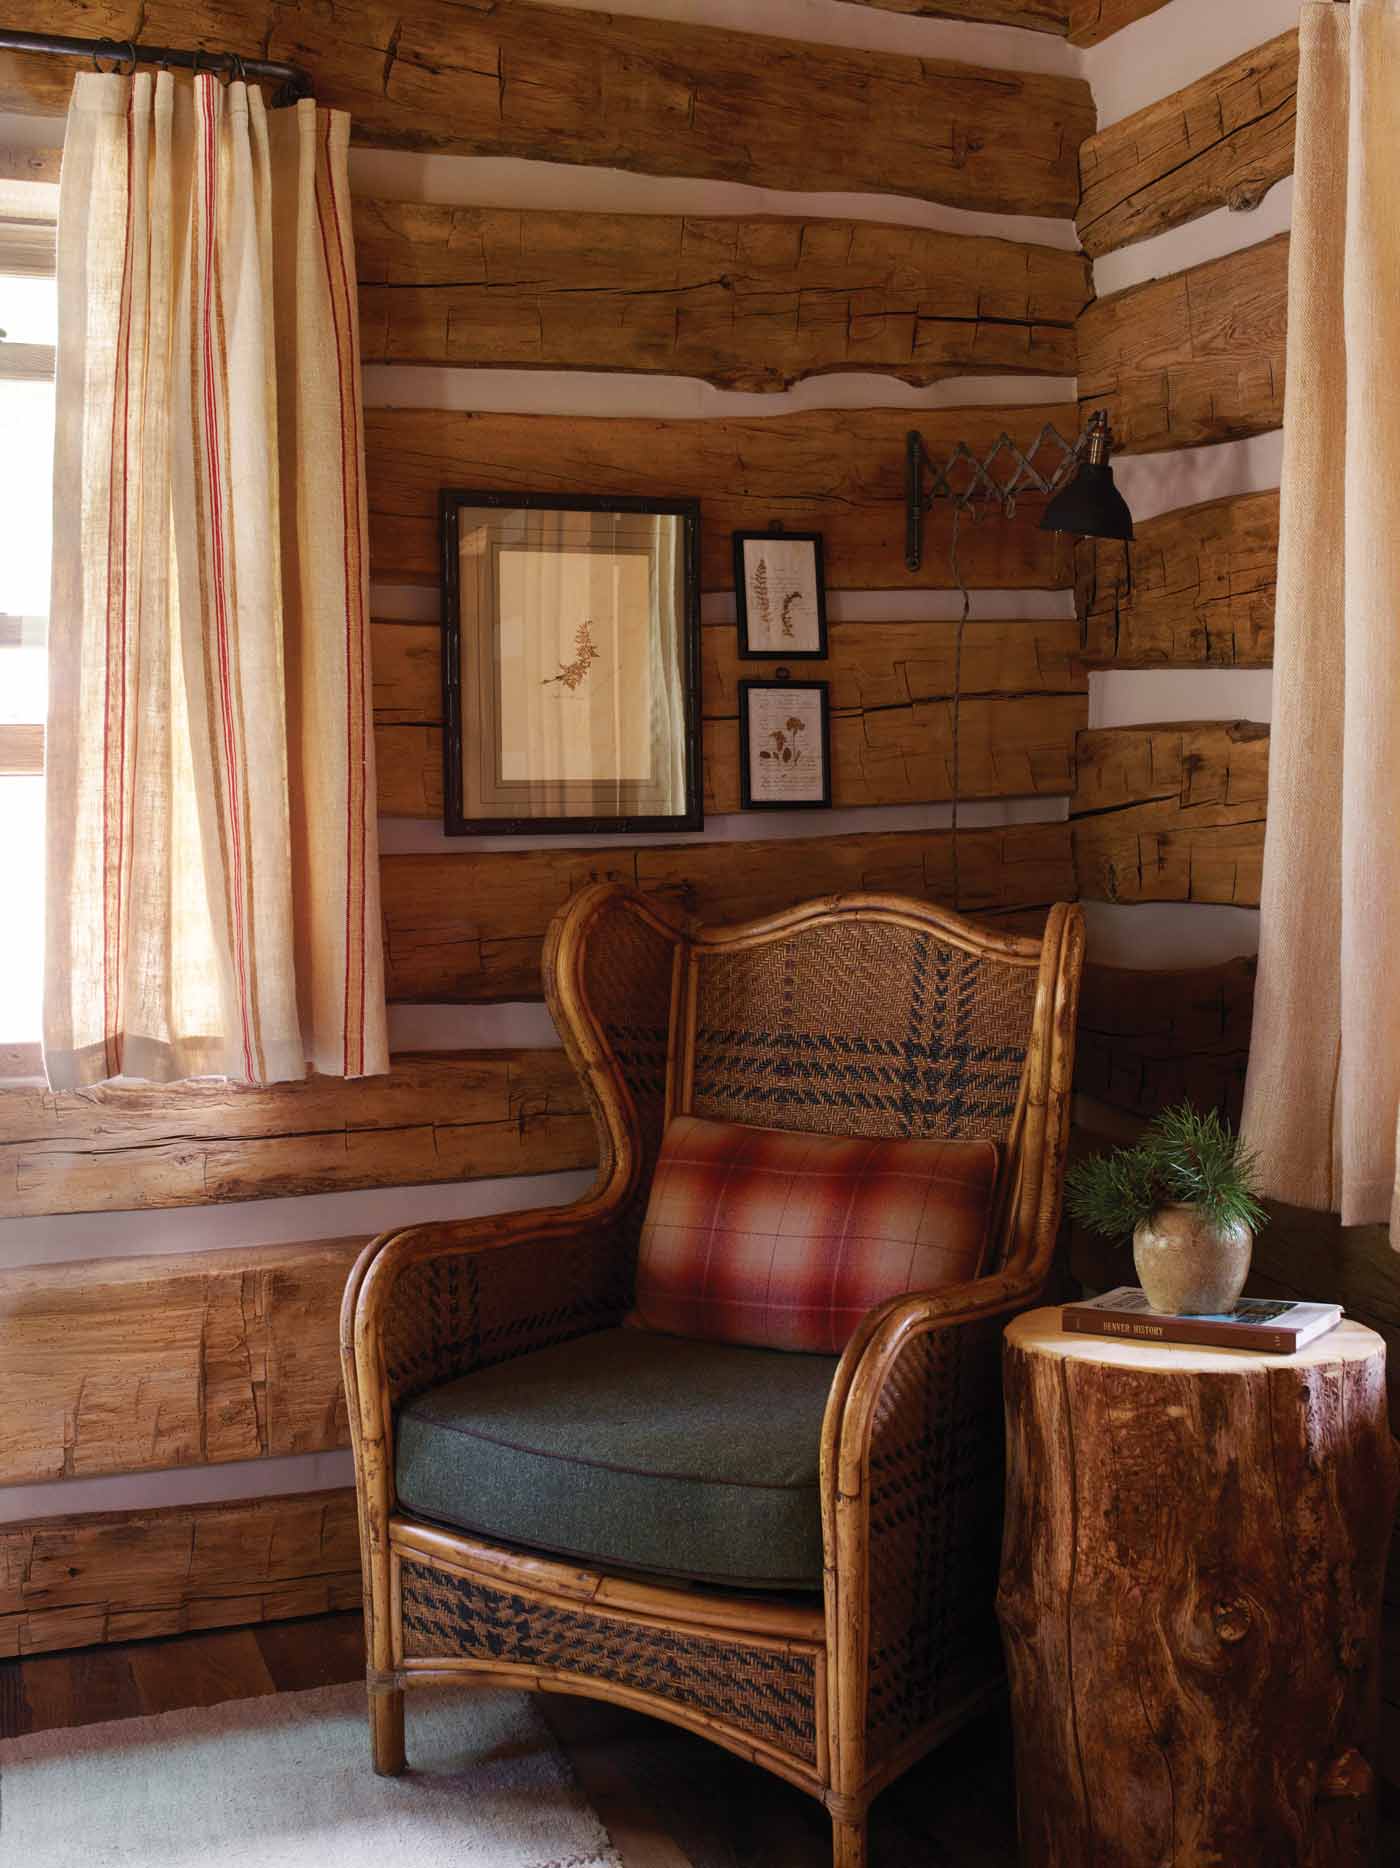 A Perfect Spot For To Relax With A Book After A Day Of Outdoor Adventure At Elevens Taylor River Lodge